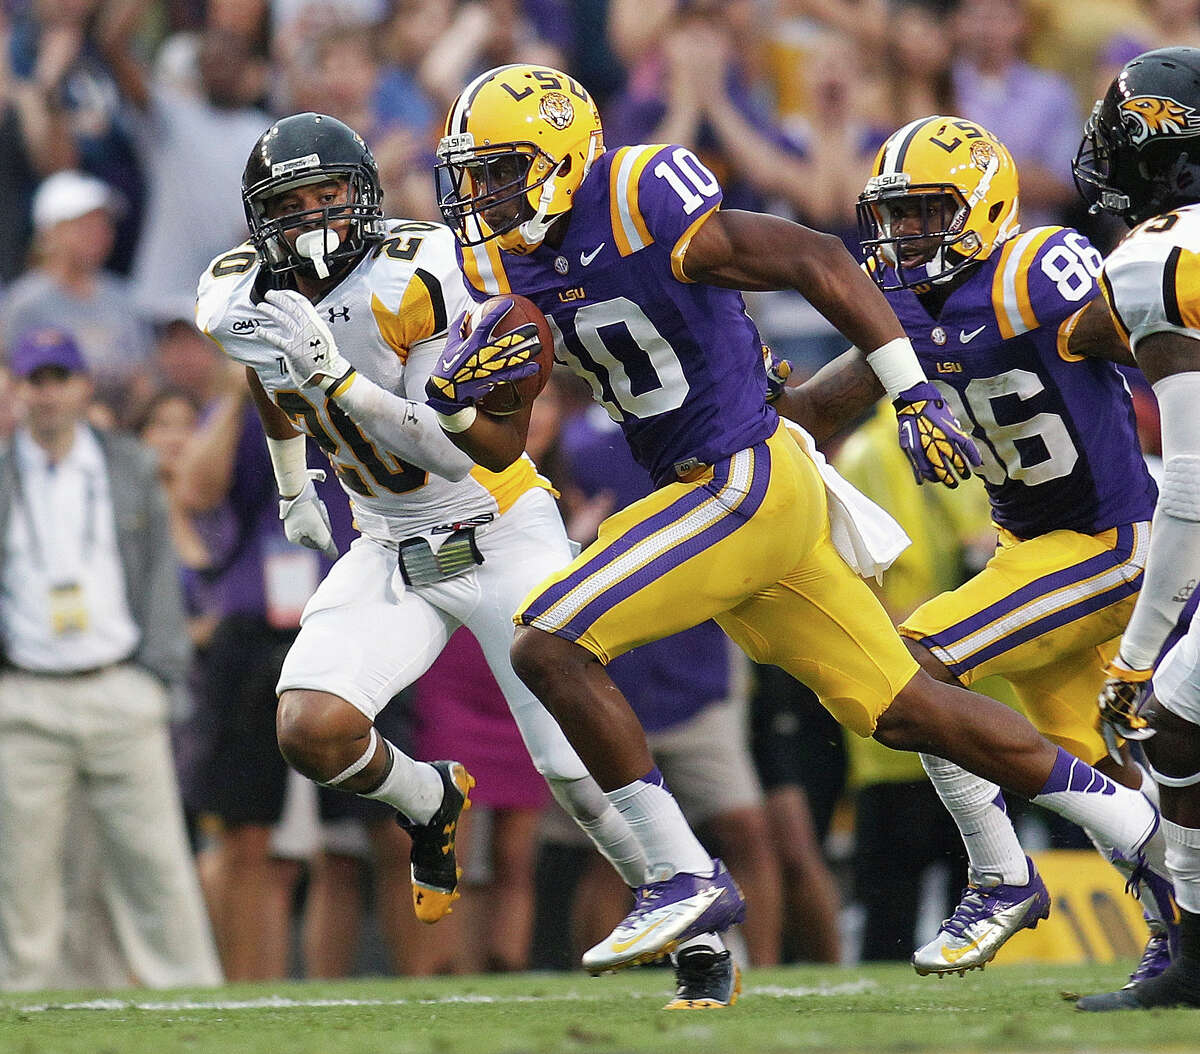 LSU wide receiver Russell Shepard (10) runs on a 78-yard touchdown in the first half of an NCAA college football game against Towson in Baton Rouge, La., Saturday, Sept. 29, 2012. Behind him are Towson safety Jordan Dangerfield (20) and LSU wide receiver Kadron Boone (86). (AP Photo/Bill Haber)